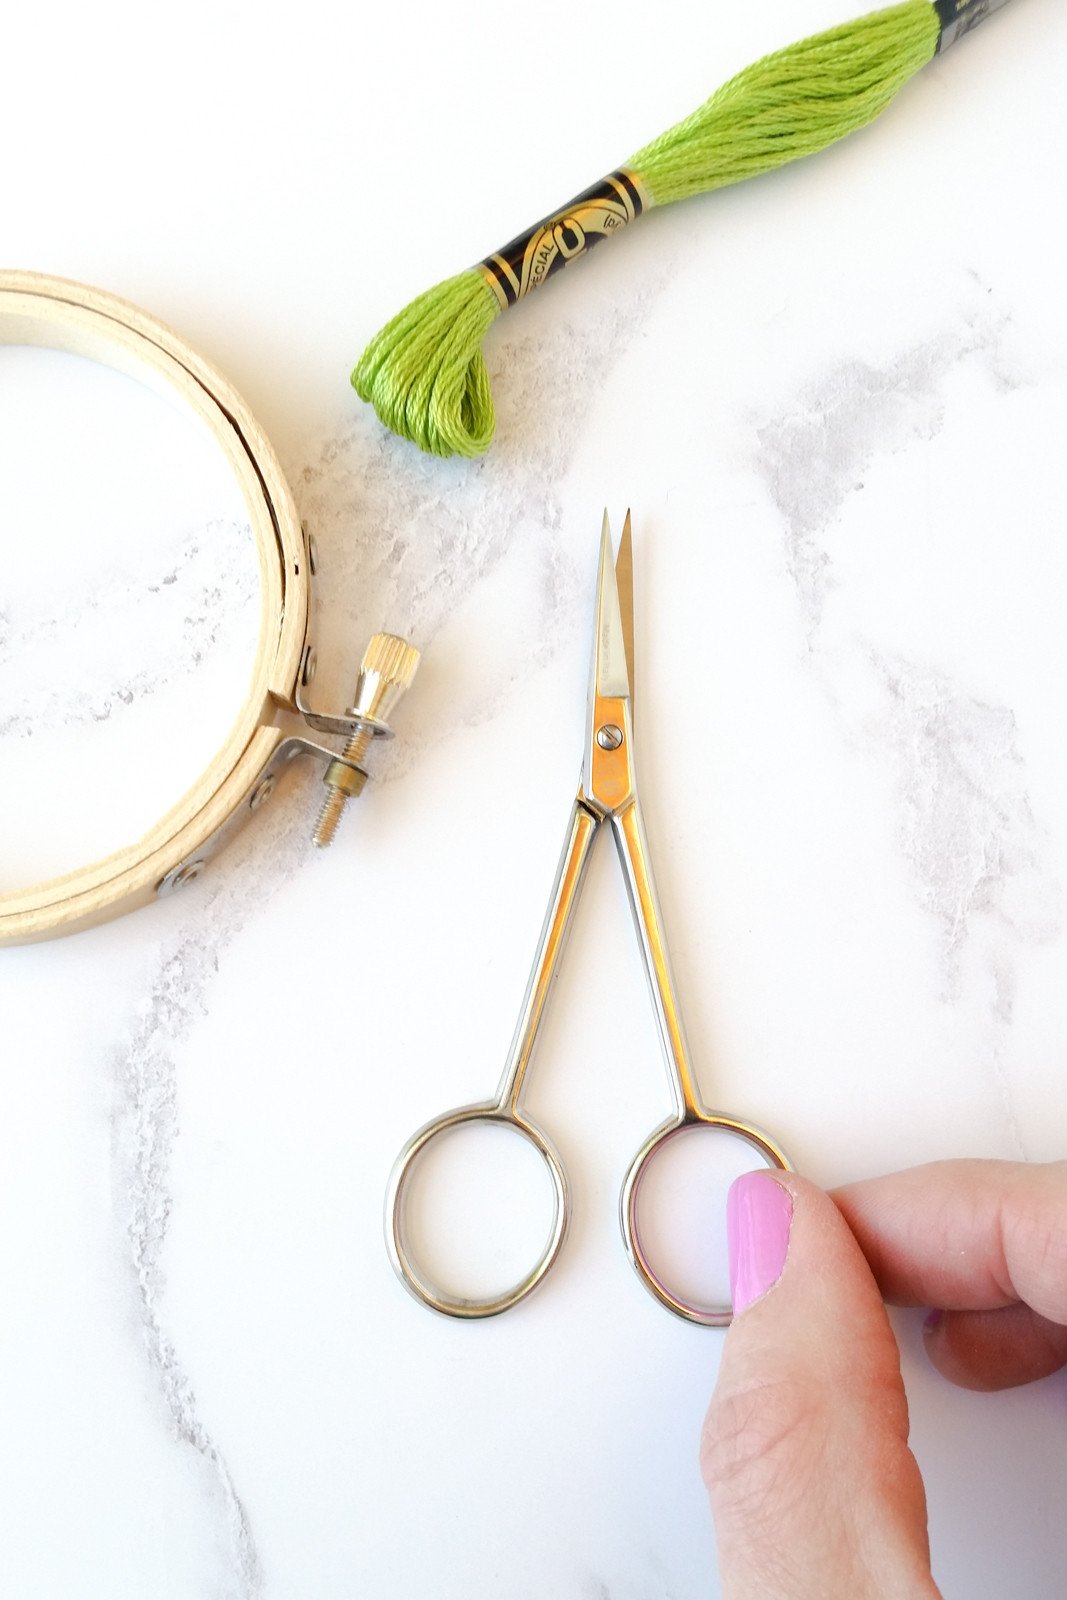 Classic long handled embroidery scissors